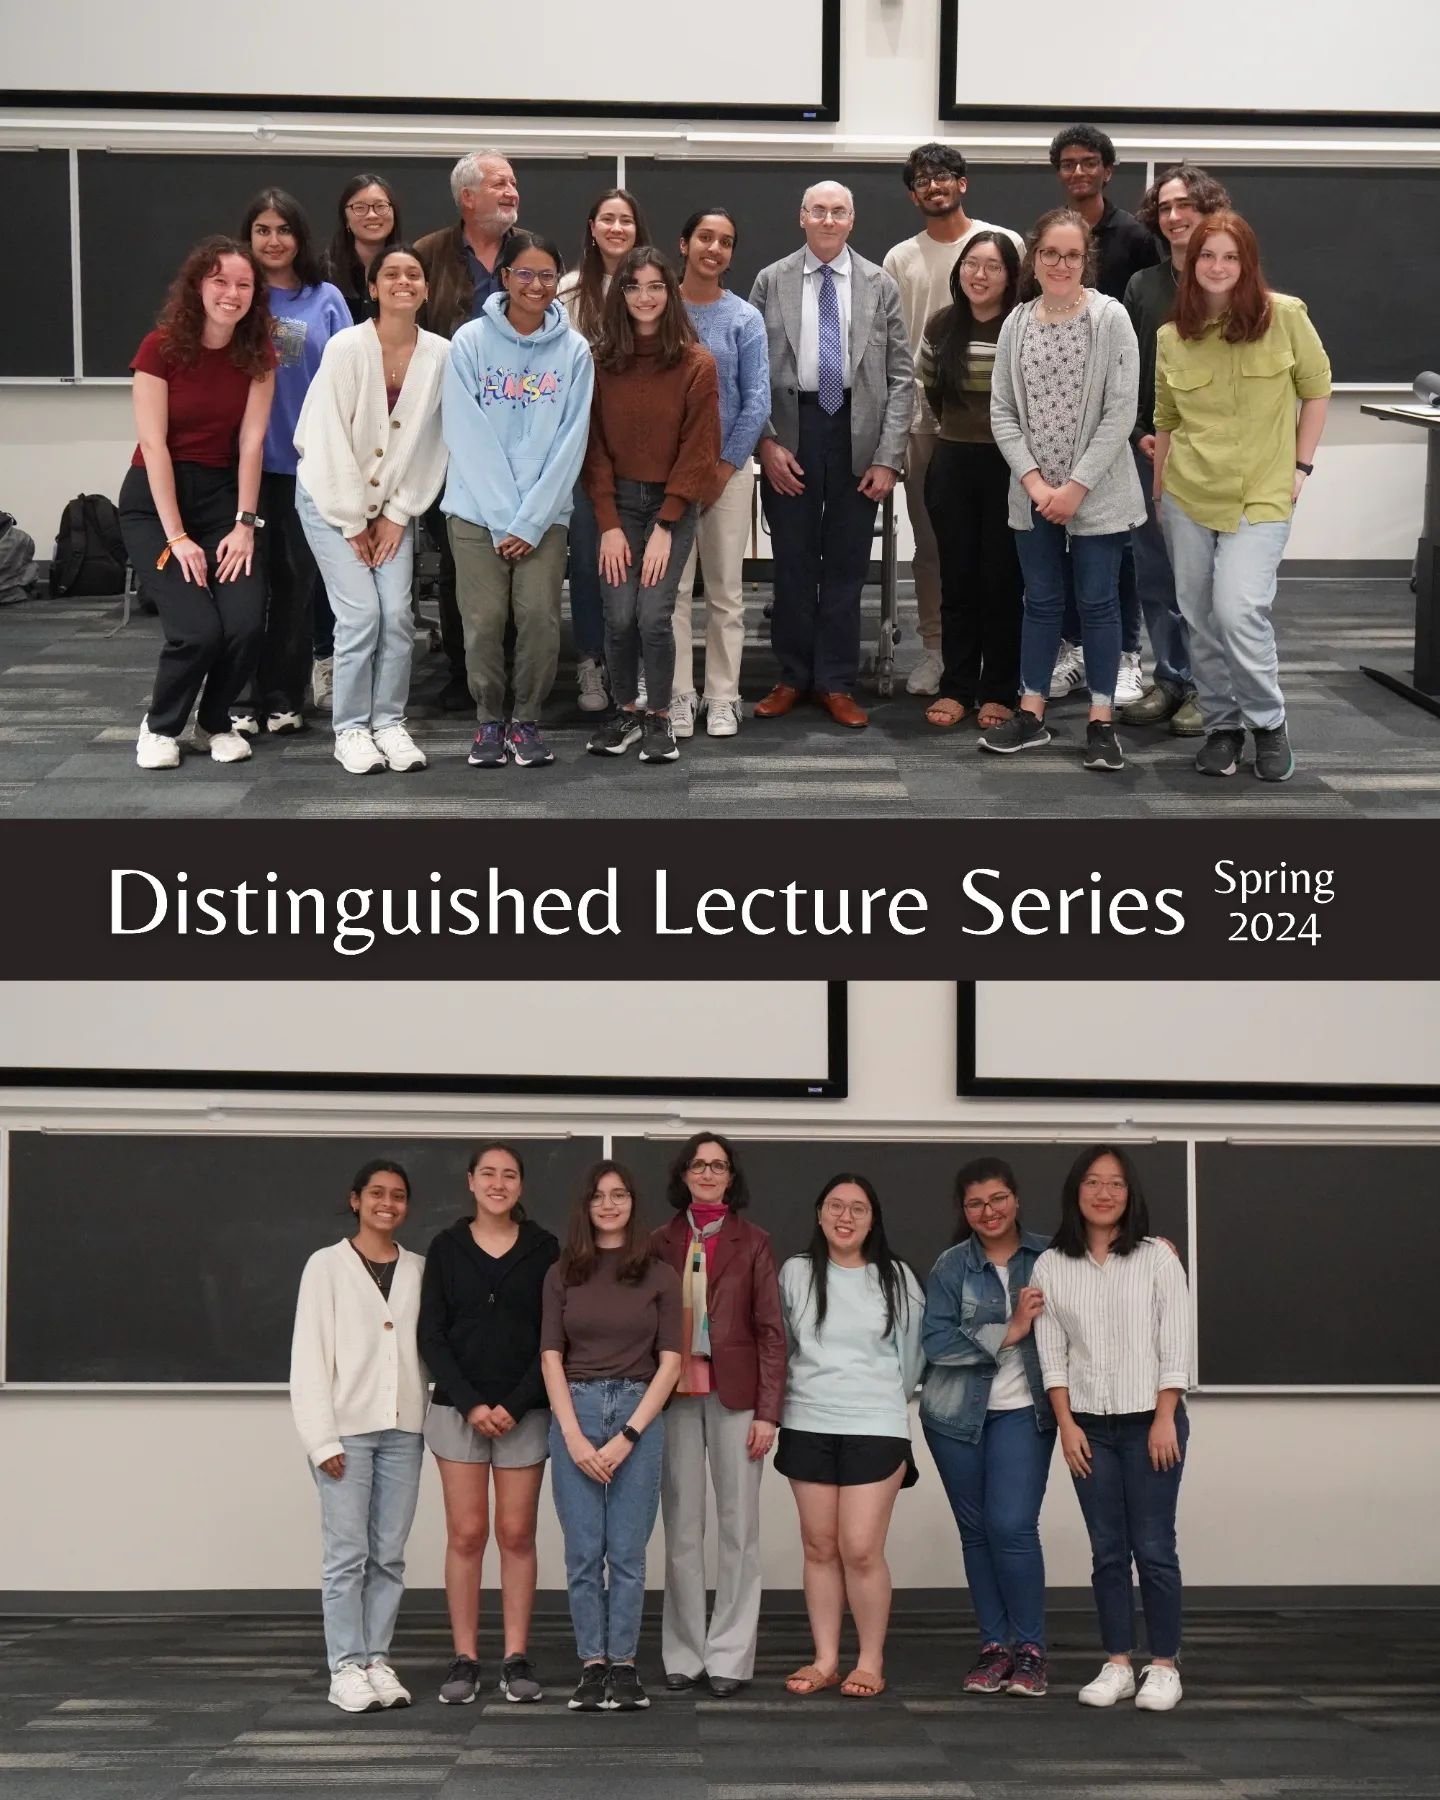 DLS Spring 2024 was such a success! We loved hearing from Dr. Weissman and Dr. Seager about their research and life experiences, and we hope everyone who attended the meet &amp; greet and lectures learned a lot.

Our sincerest gratitude to our commit